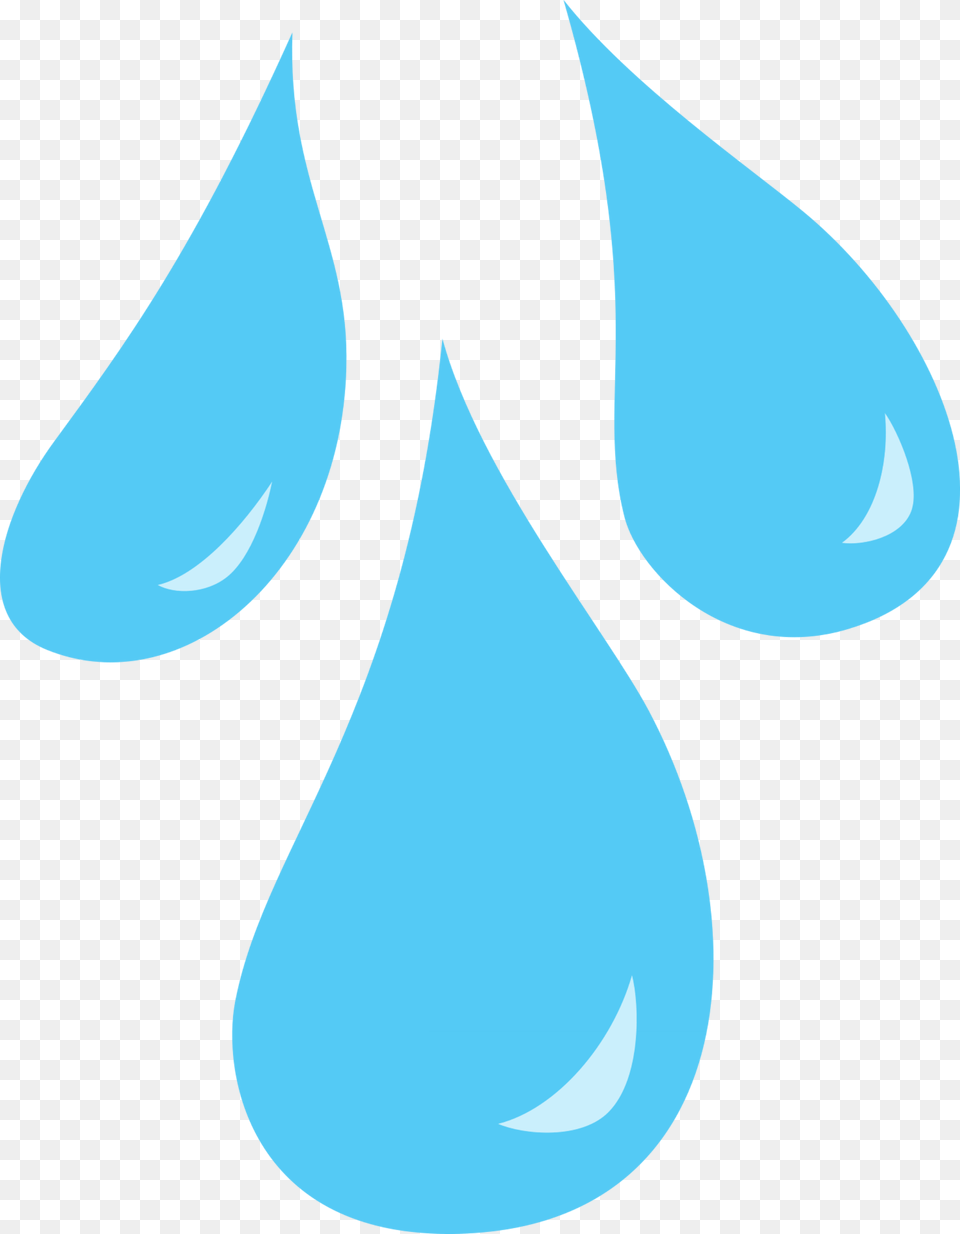 Sweat Drops Clipart The Image Kid Has Water Droplets Clip Art, Accessories, Jewelry, Droplet, Earring Free Transparent Png